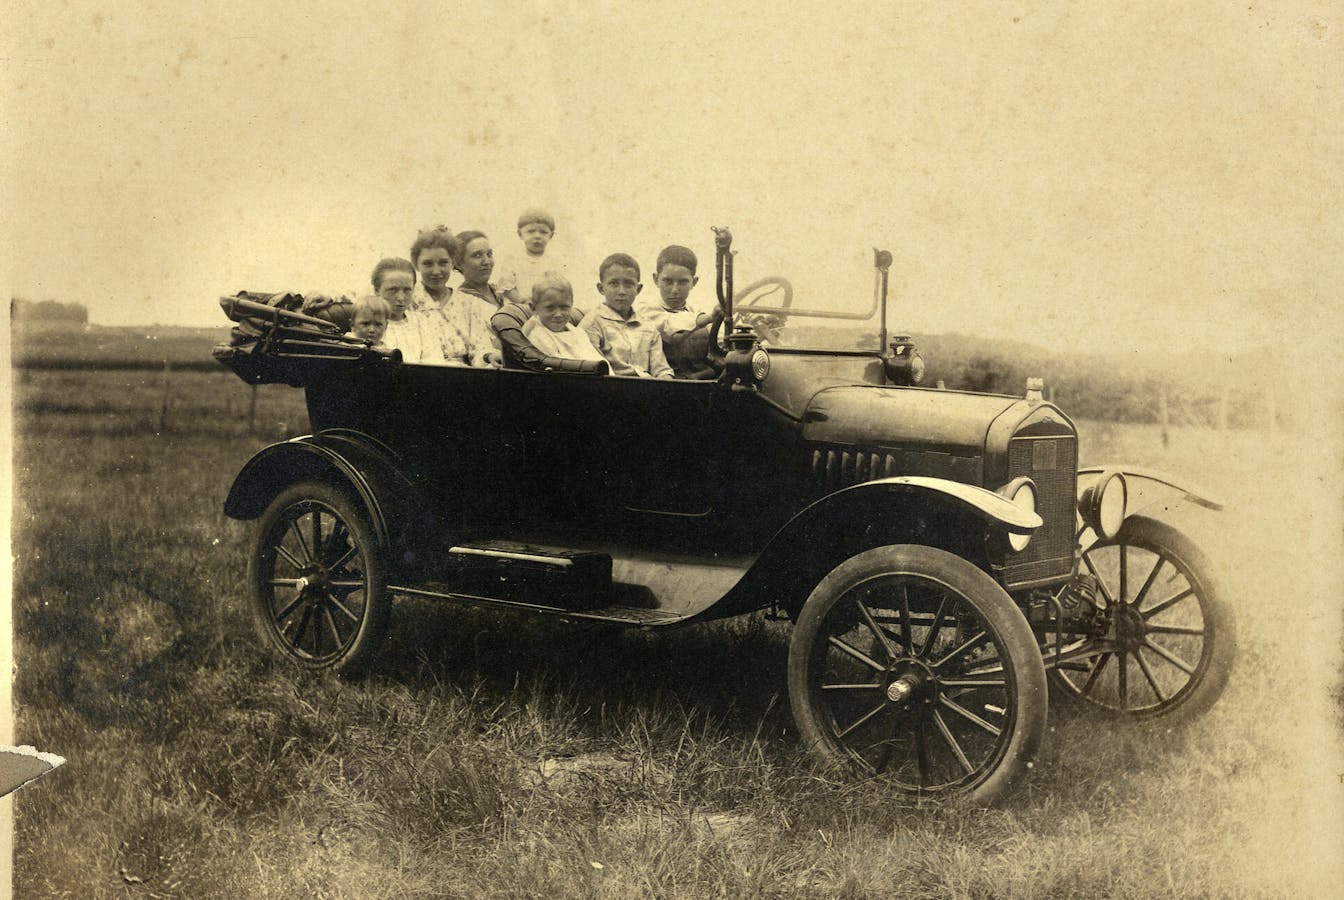 In the 1910s and 1920s, the Ford Model T cracked open the automobile market for the masses. Photo: Courtesy William Creswell/Creative Commons